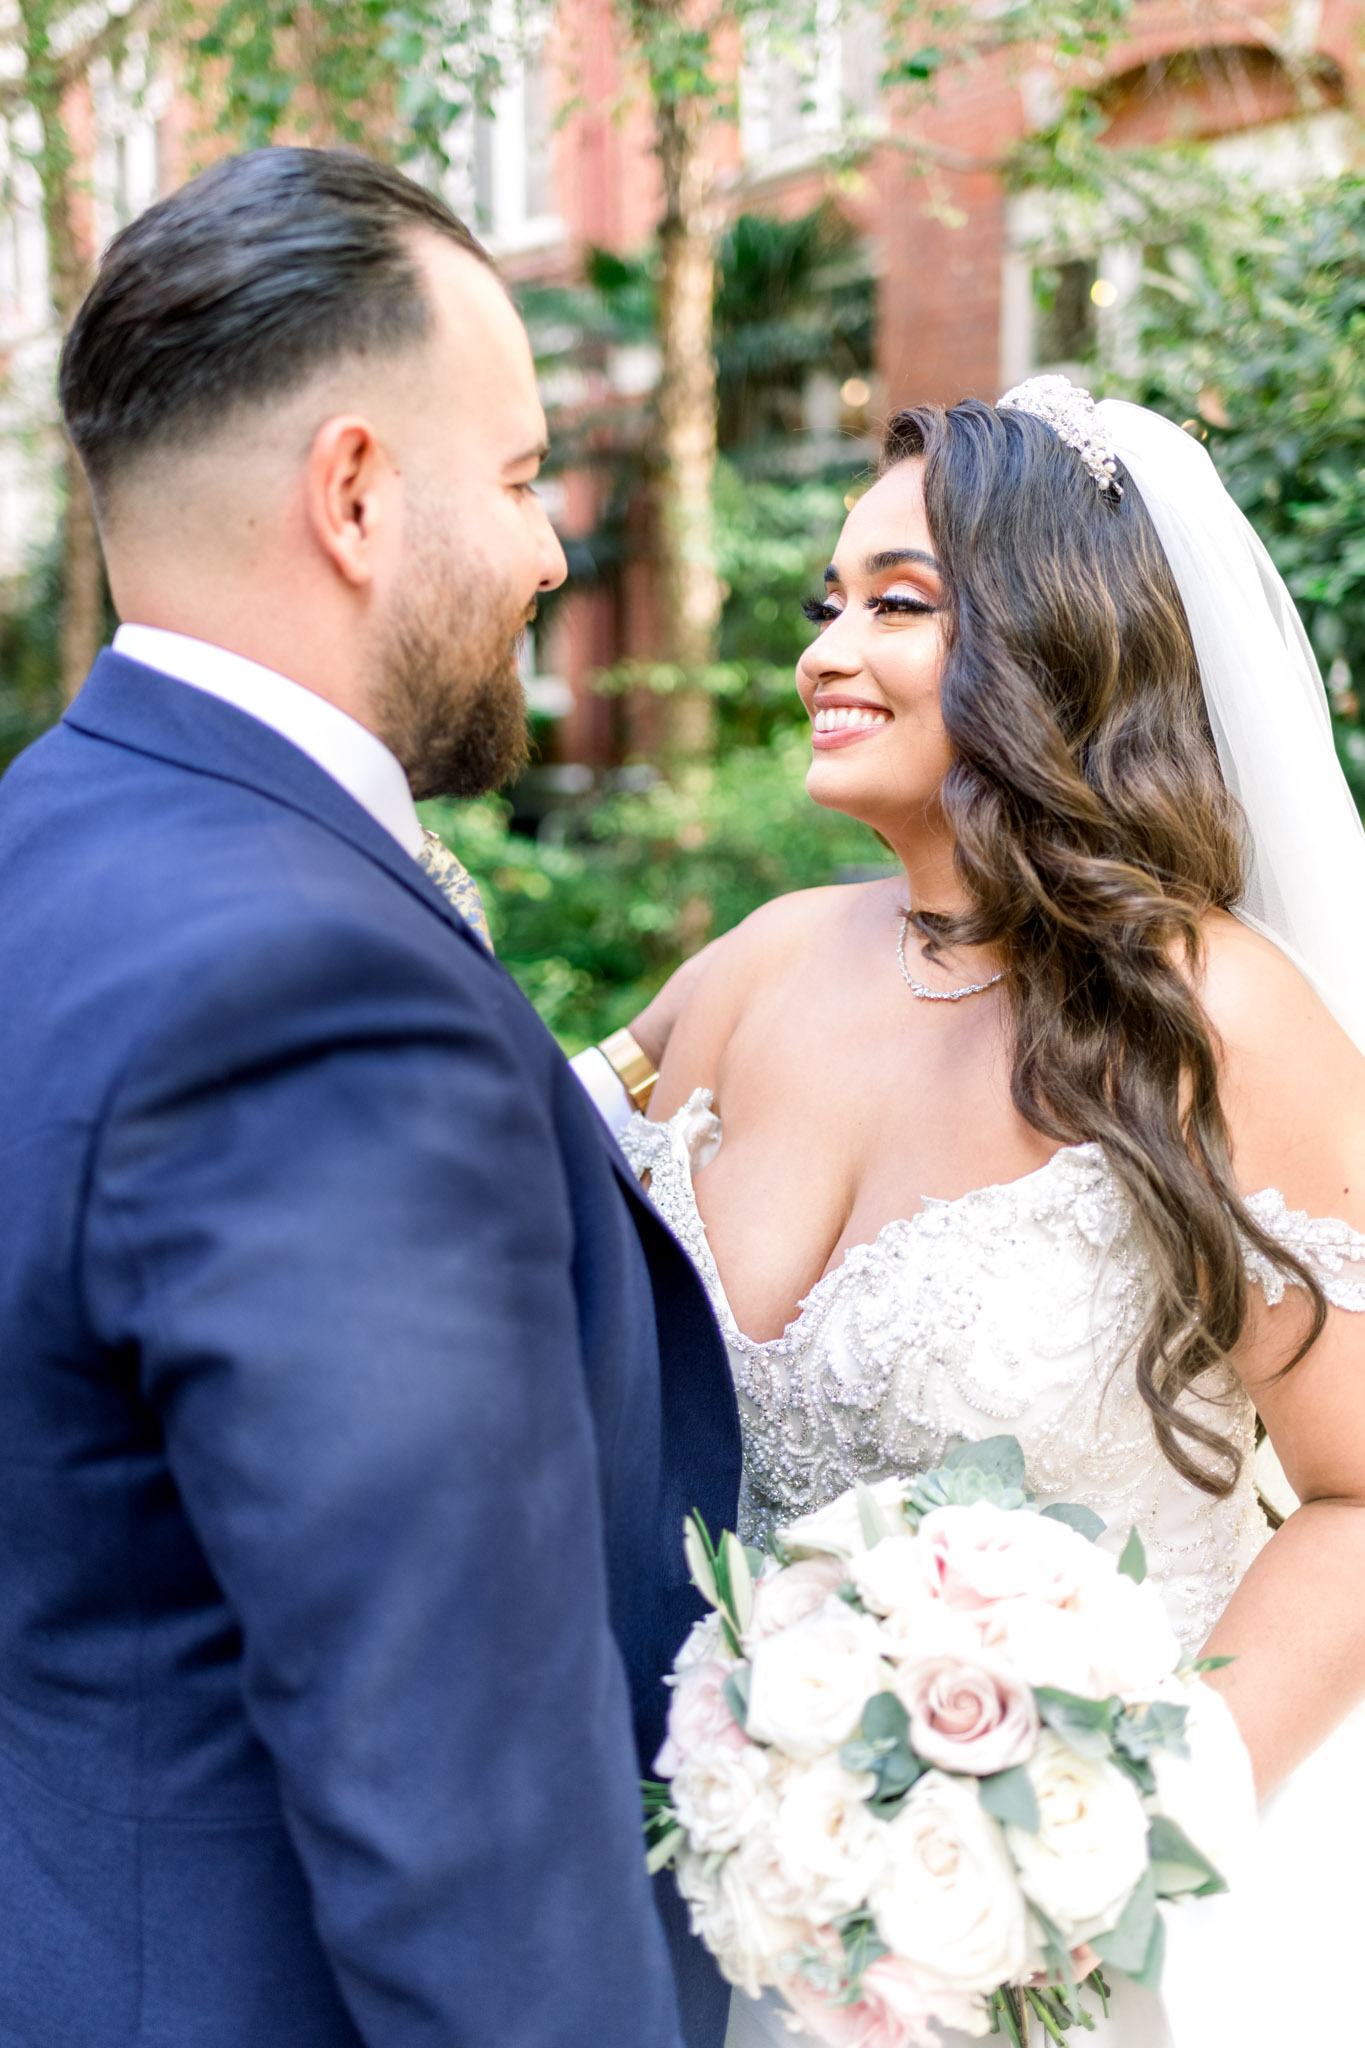 https://usercontent.one/wp/www.natalieandmax.co.uk/wp-content/uploads/2022/09/S-J-Natalie-and-Max-Photo-and-Films-St.-Ermins-Hotel-Wedding-Photography-492.jpg?media=1711985334